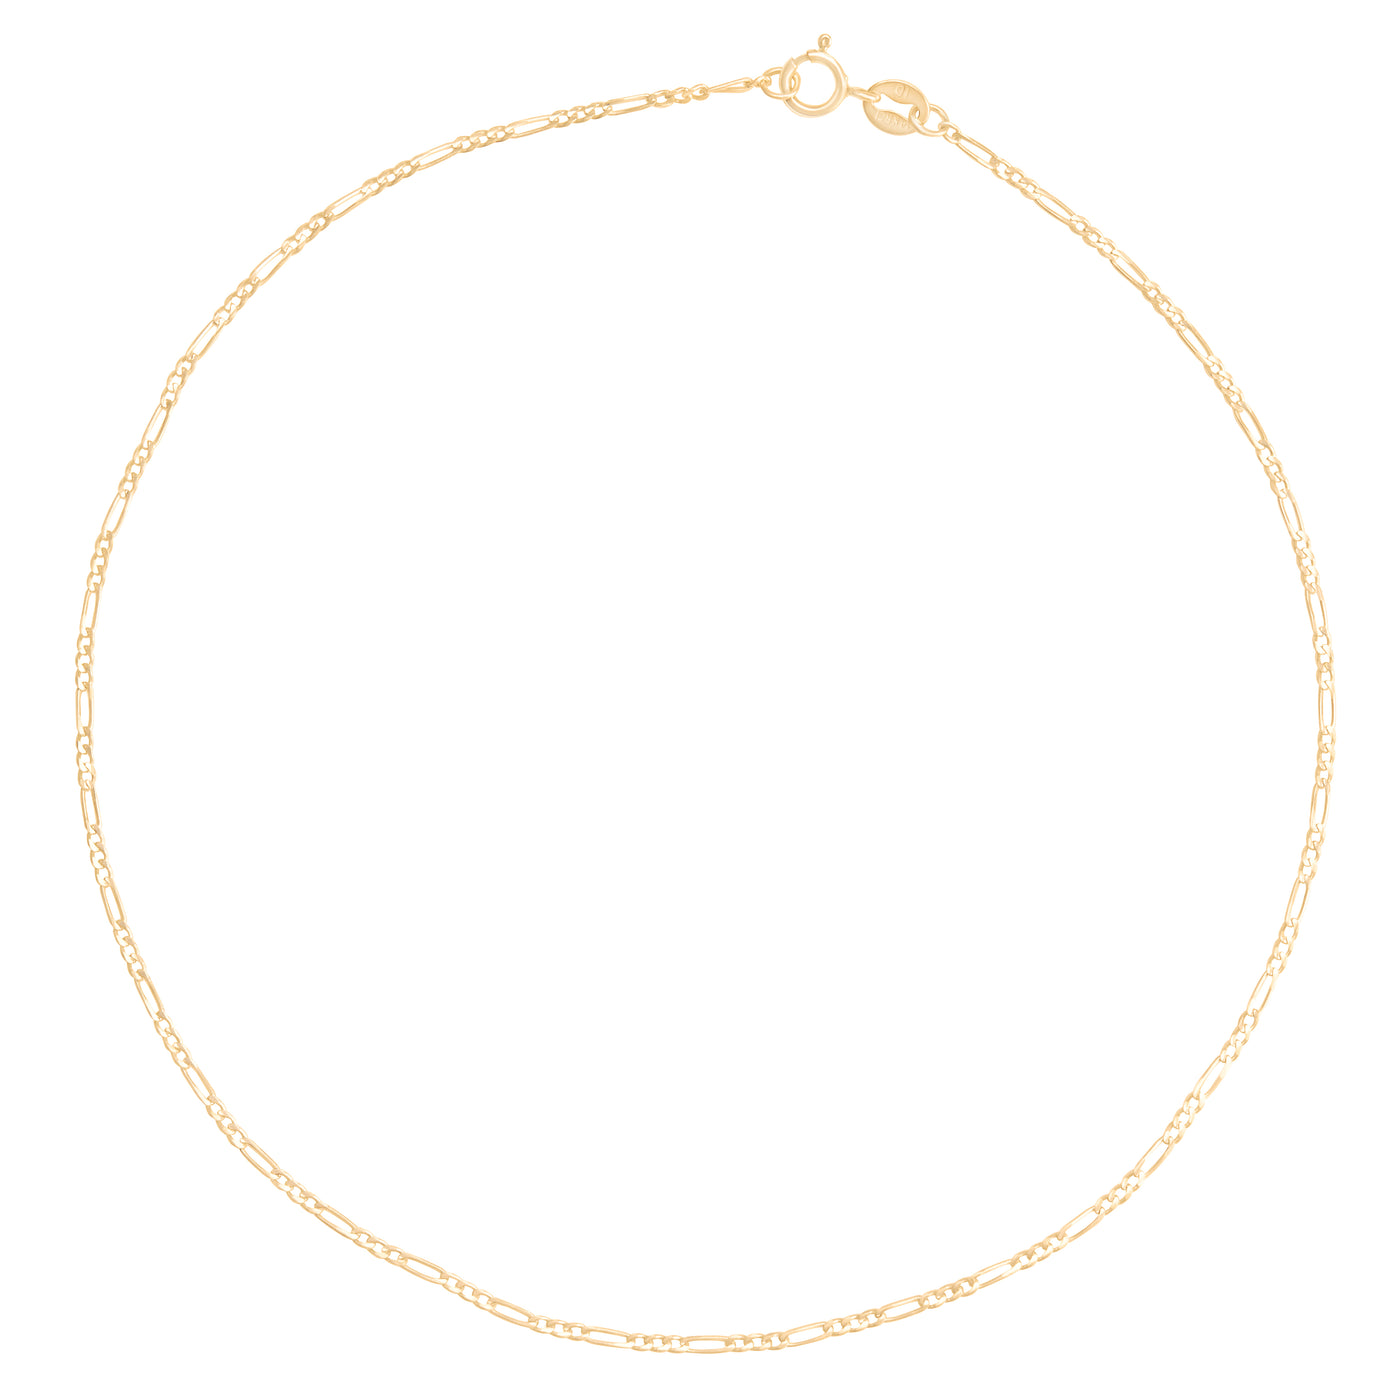 Yellow gold anklet in circle shape shown on white background